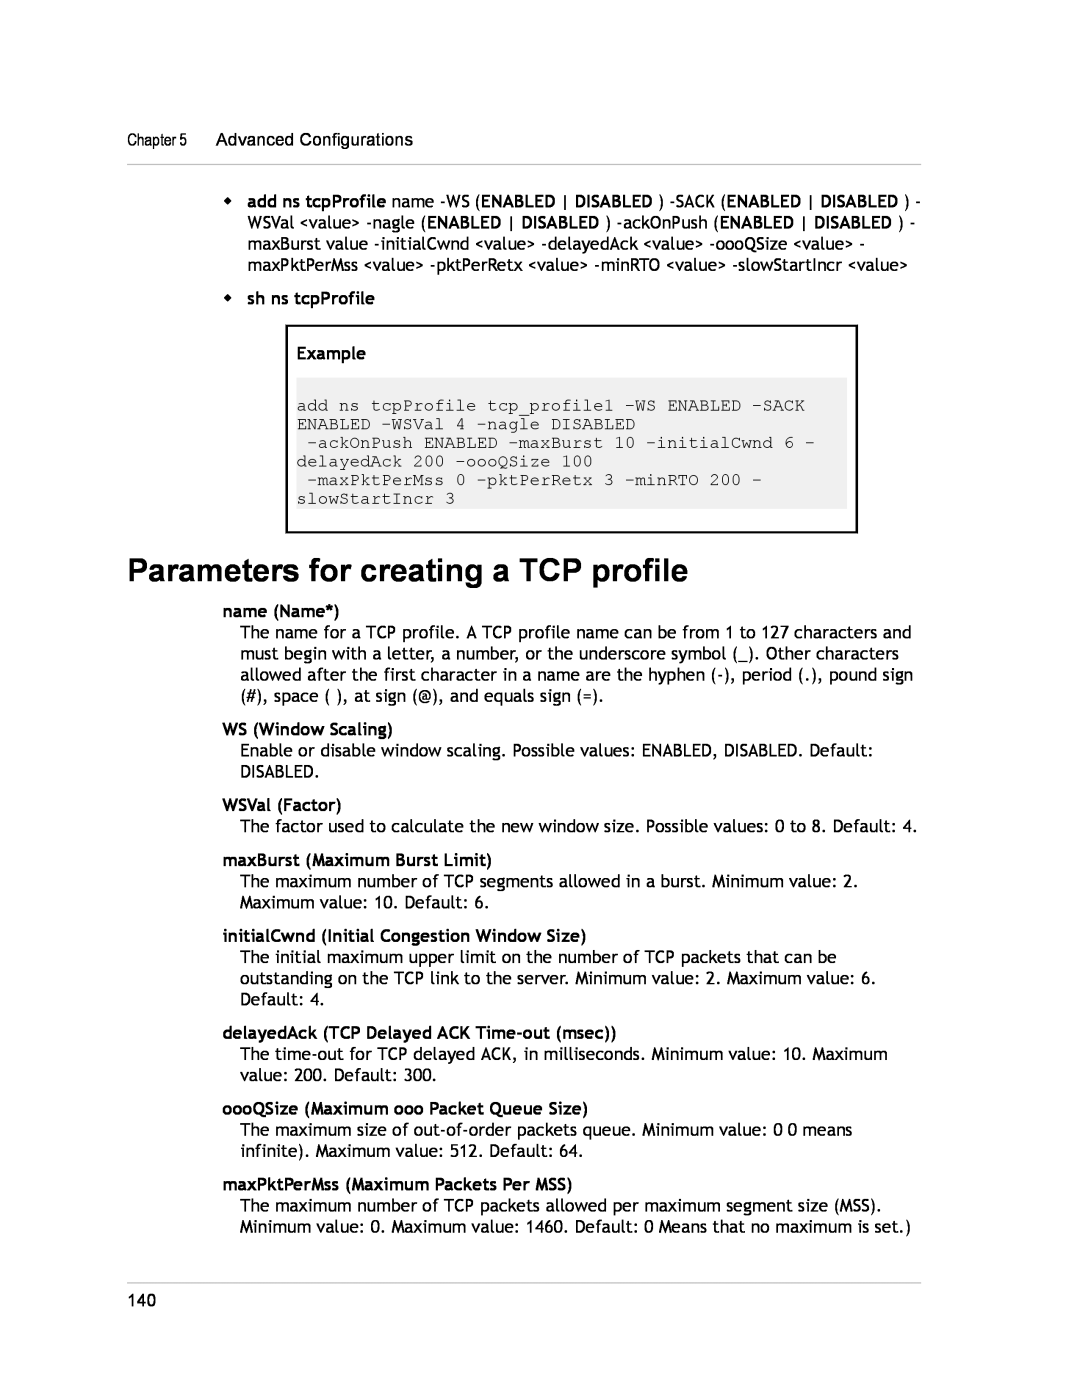 Citrix Systems CITRIX NETSCALER 9.3 Parameters for creating a TCP profile, w sh ns tcpProfile Example, WS Window Scaling 